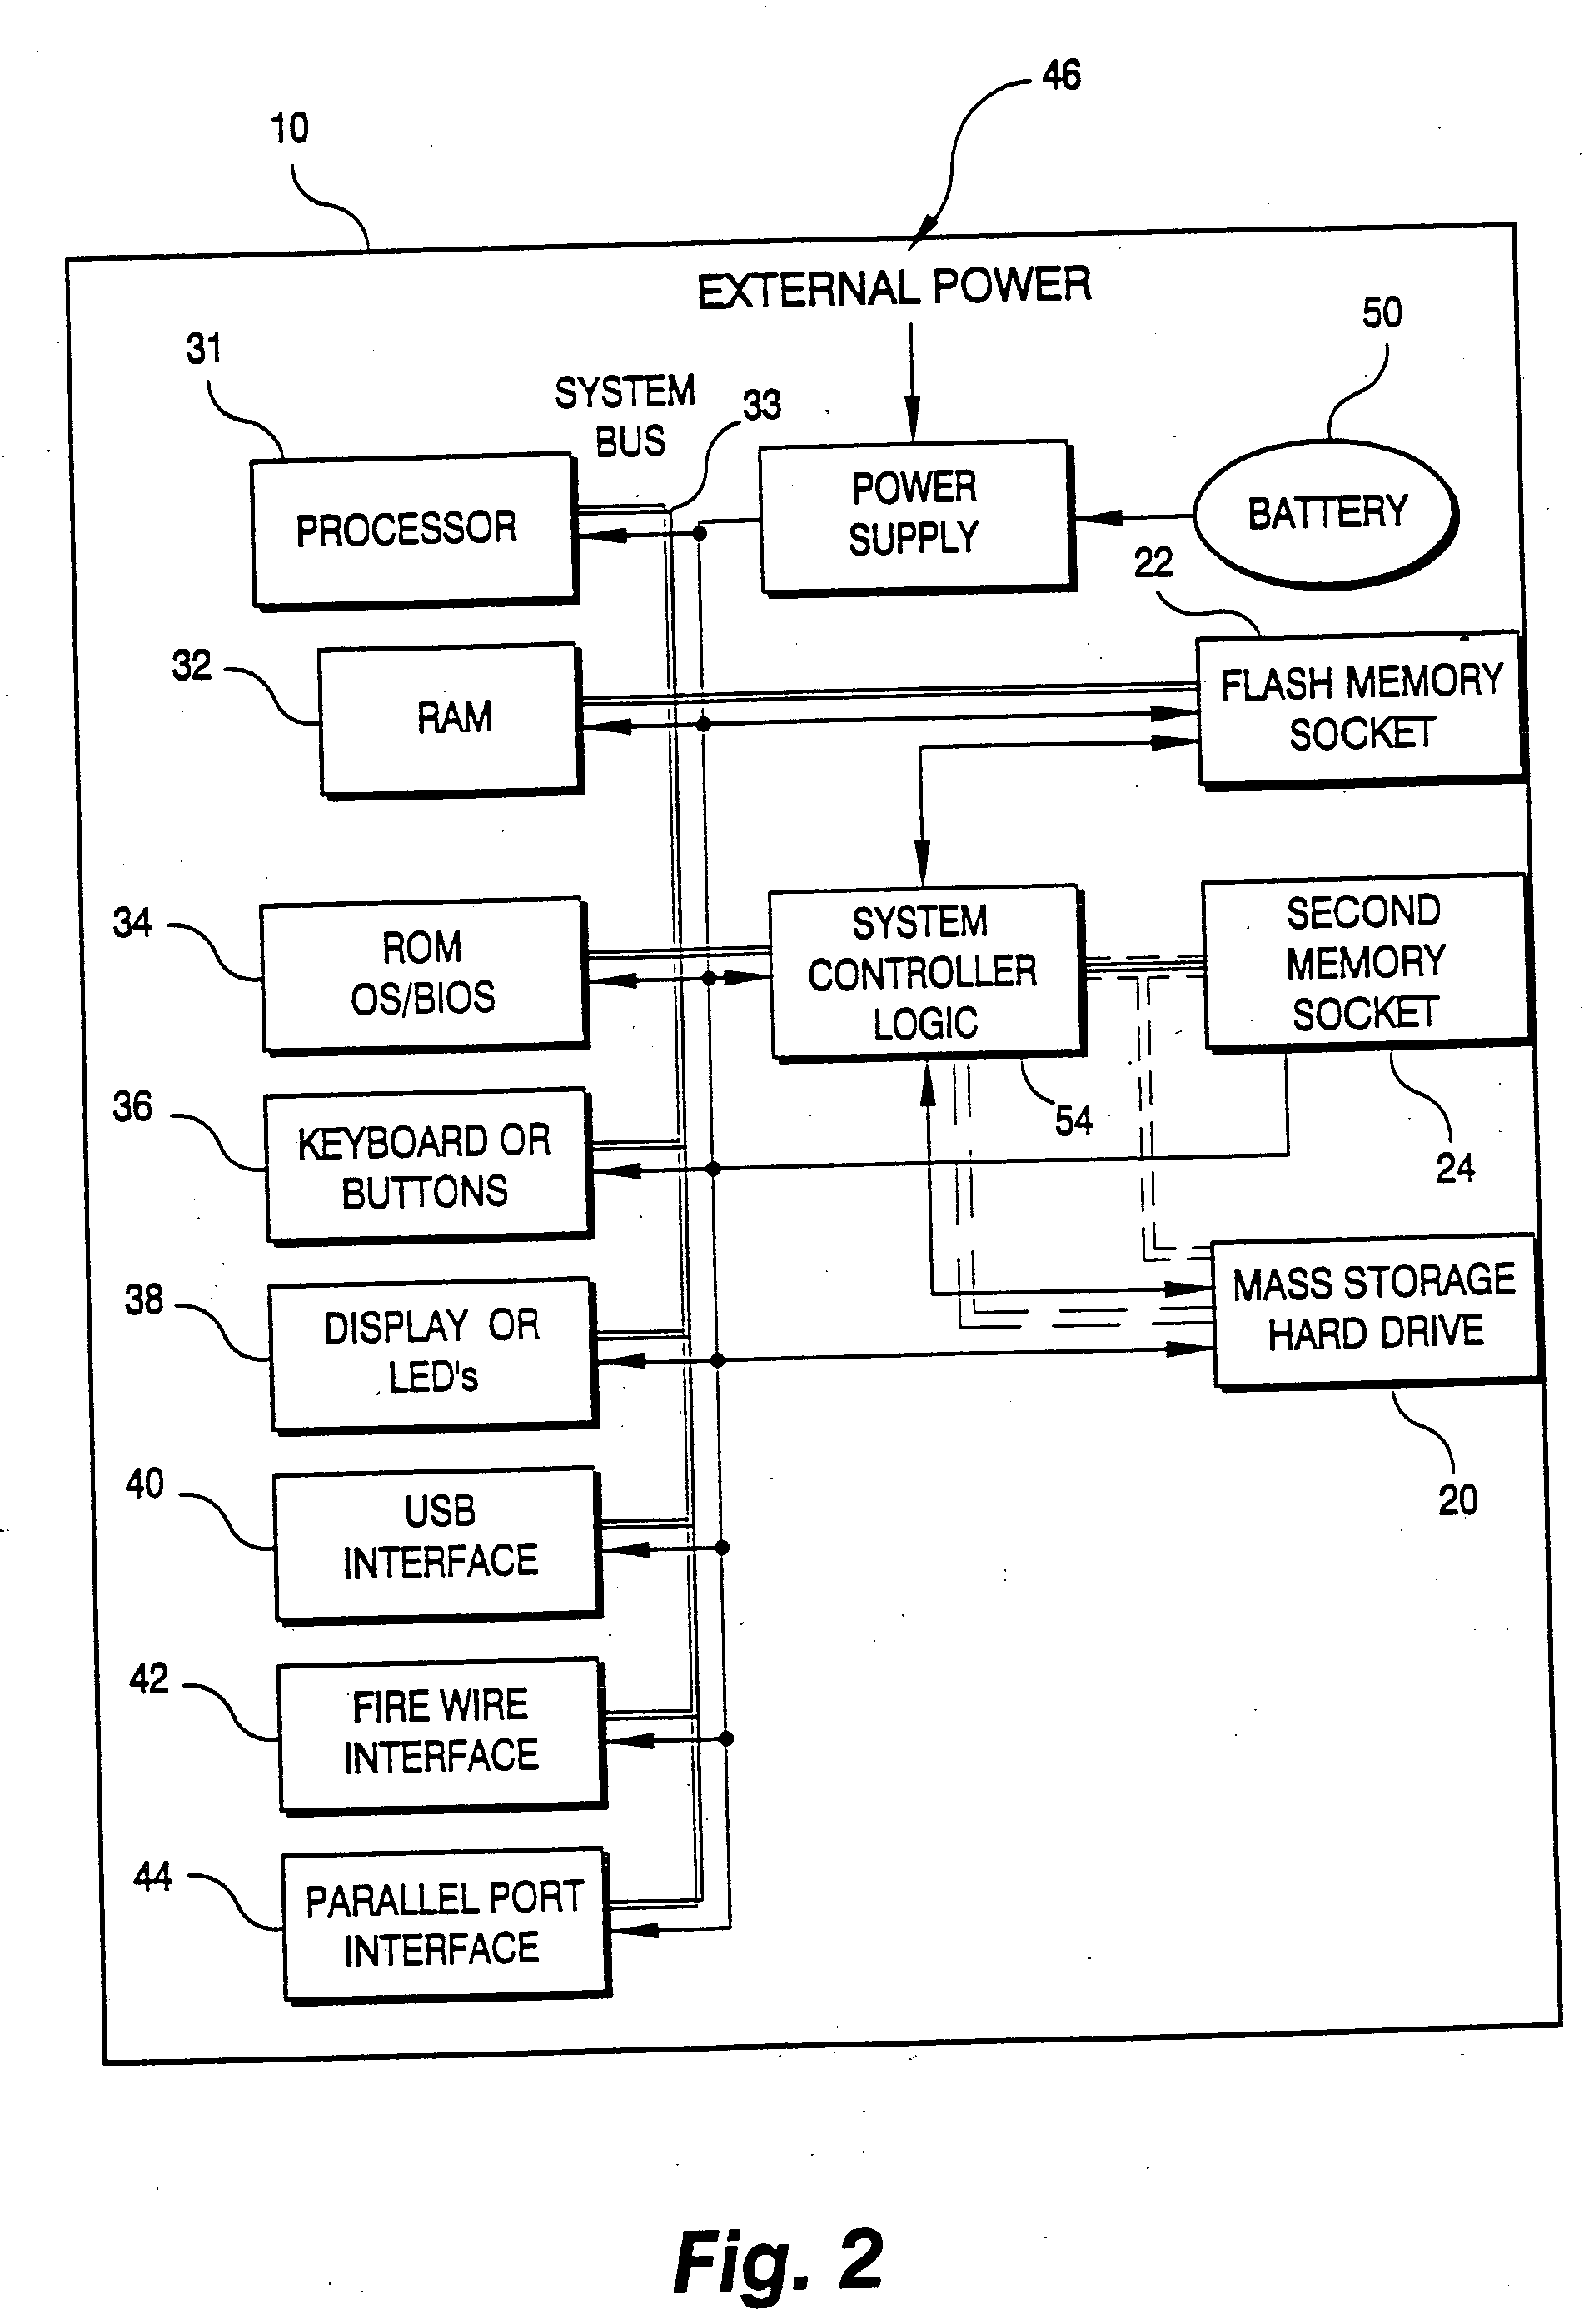 Enhanced digital data collector for removable memory modules